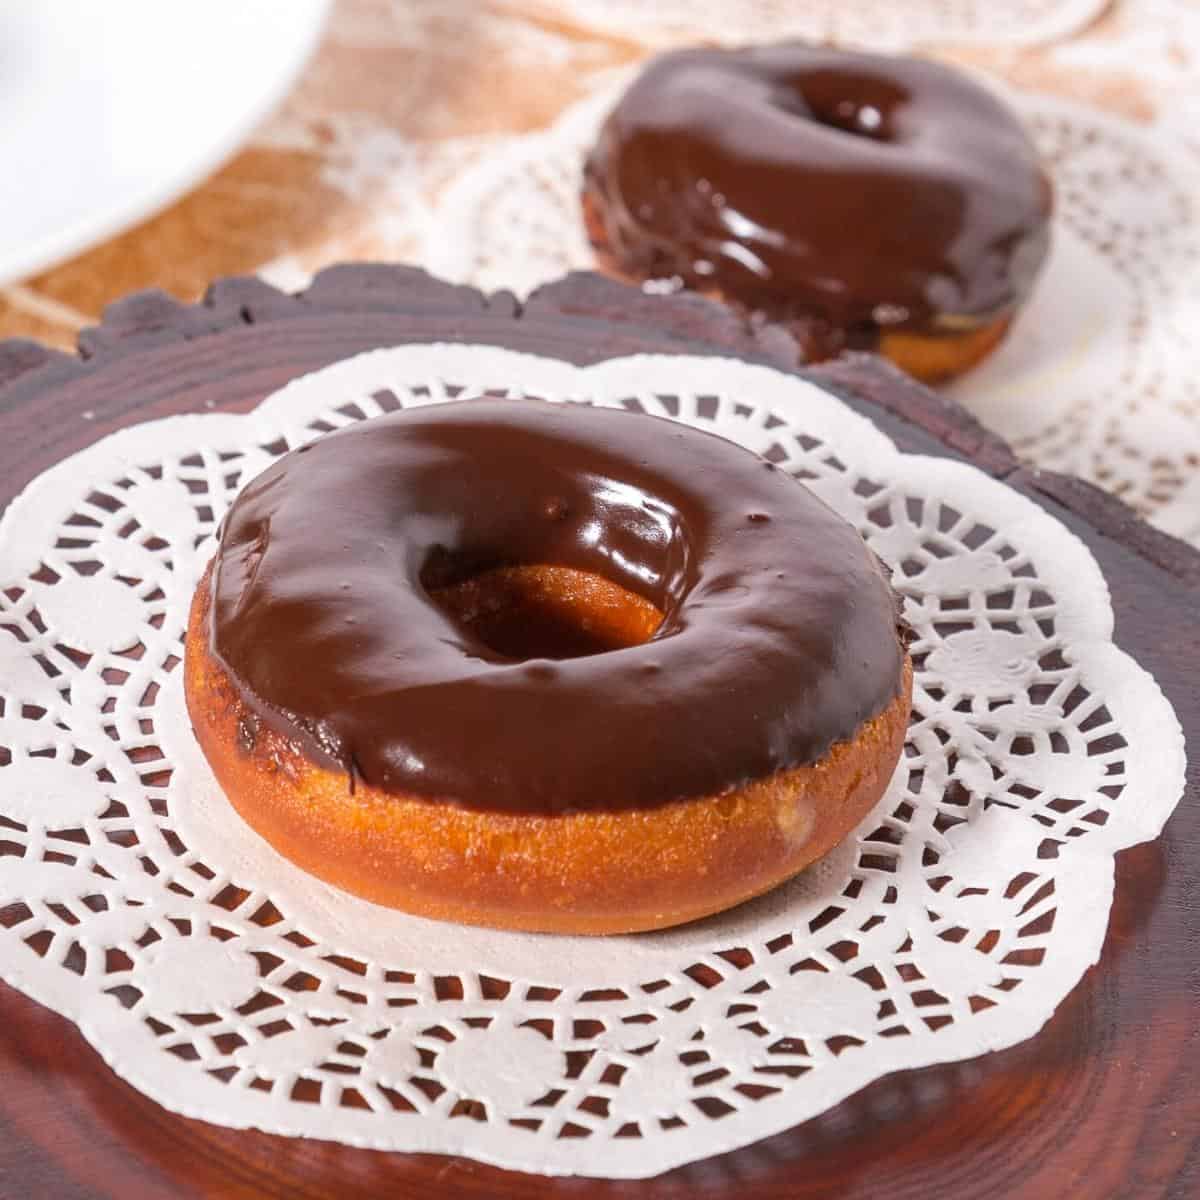 Pinterest image for chocolate glaze donuts.